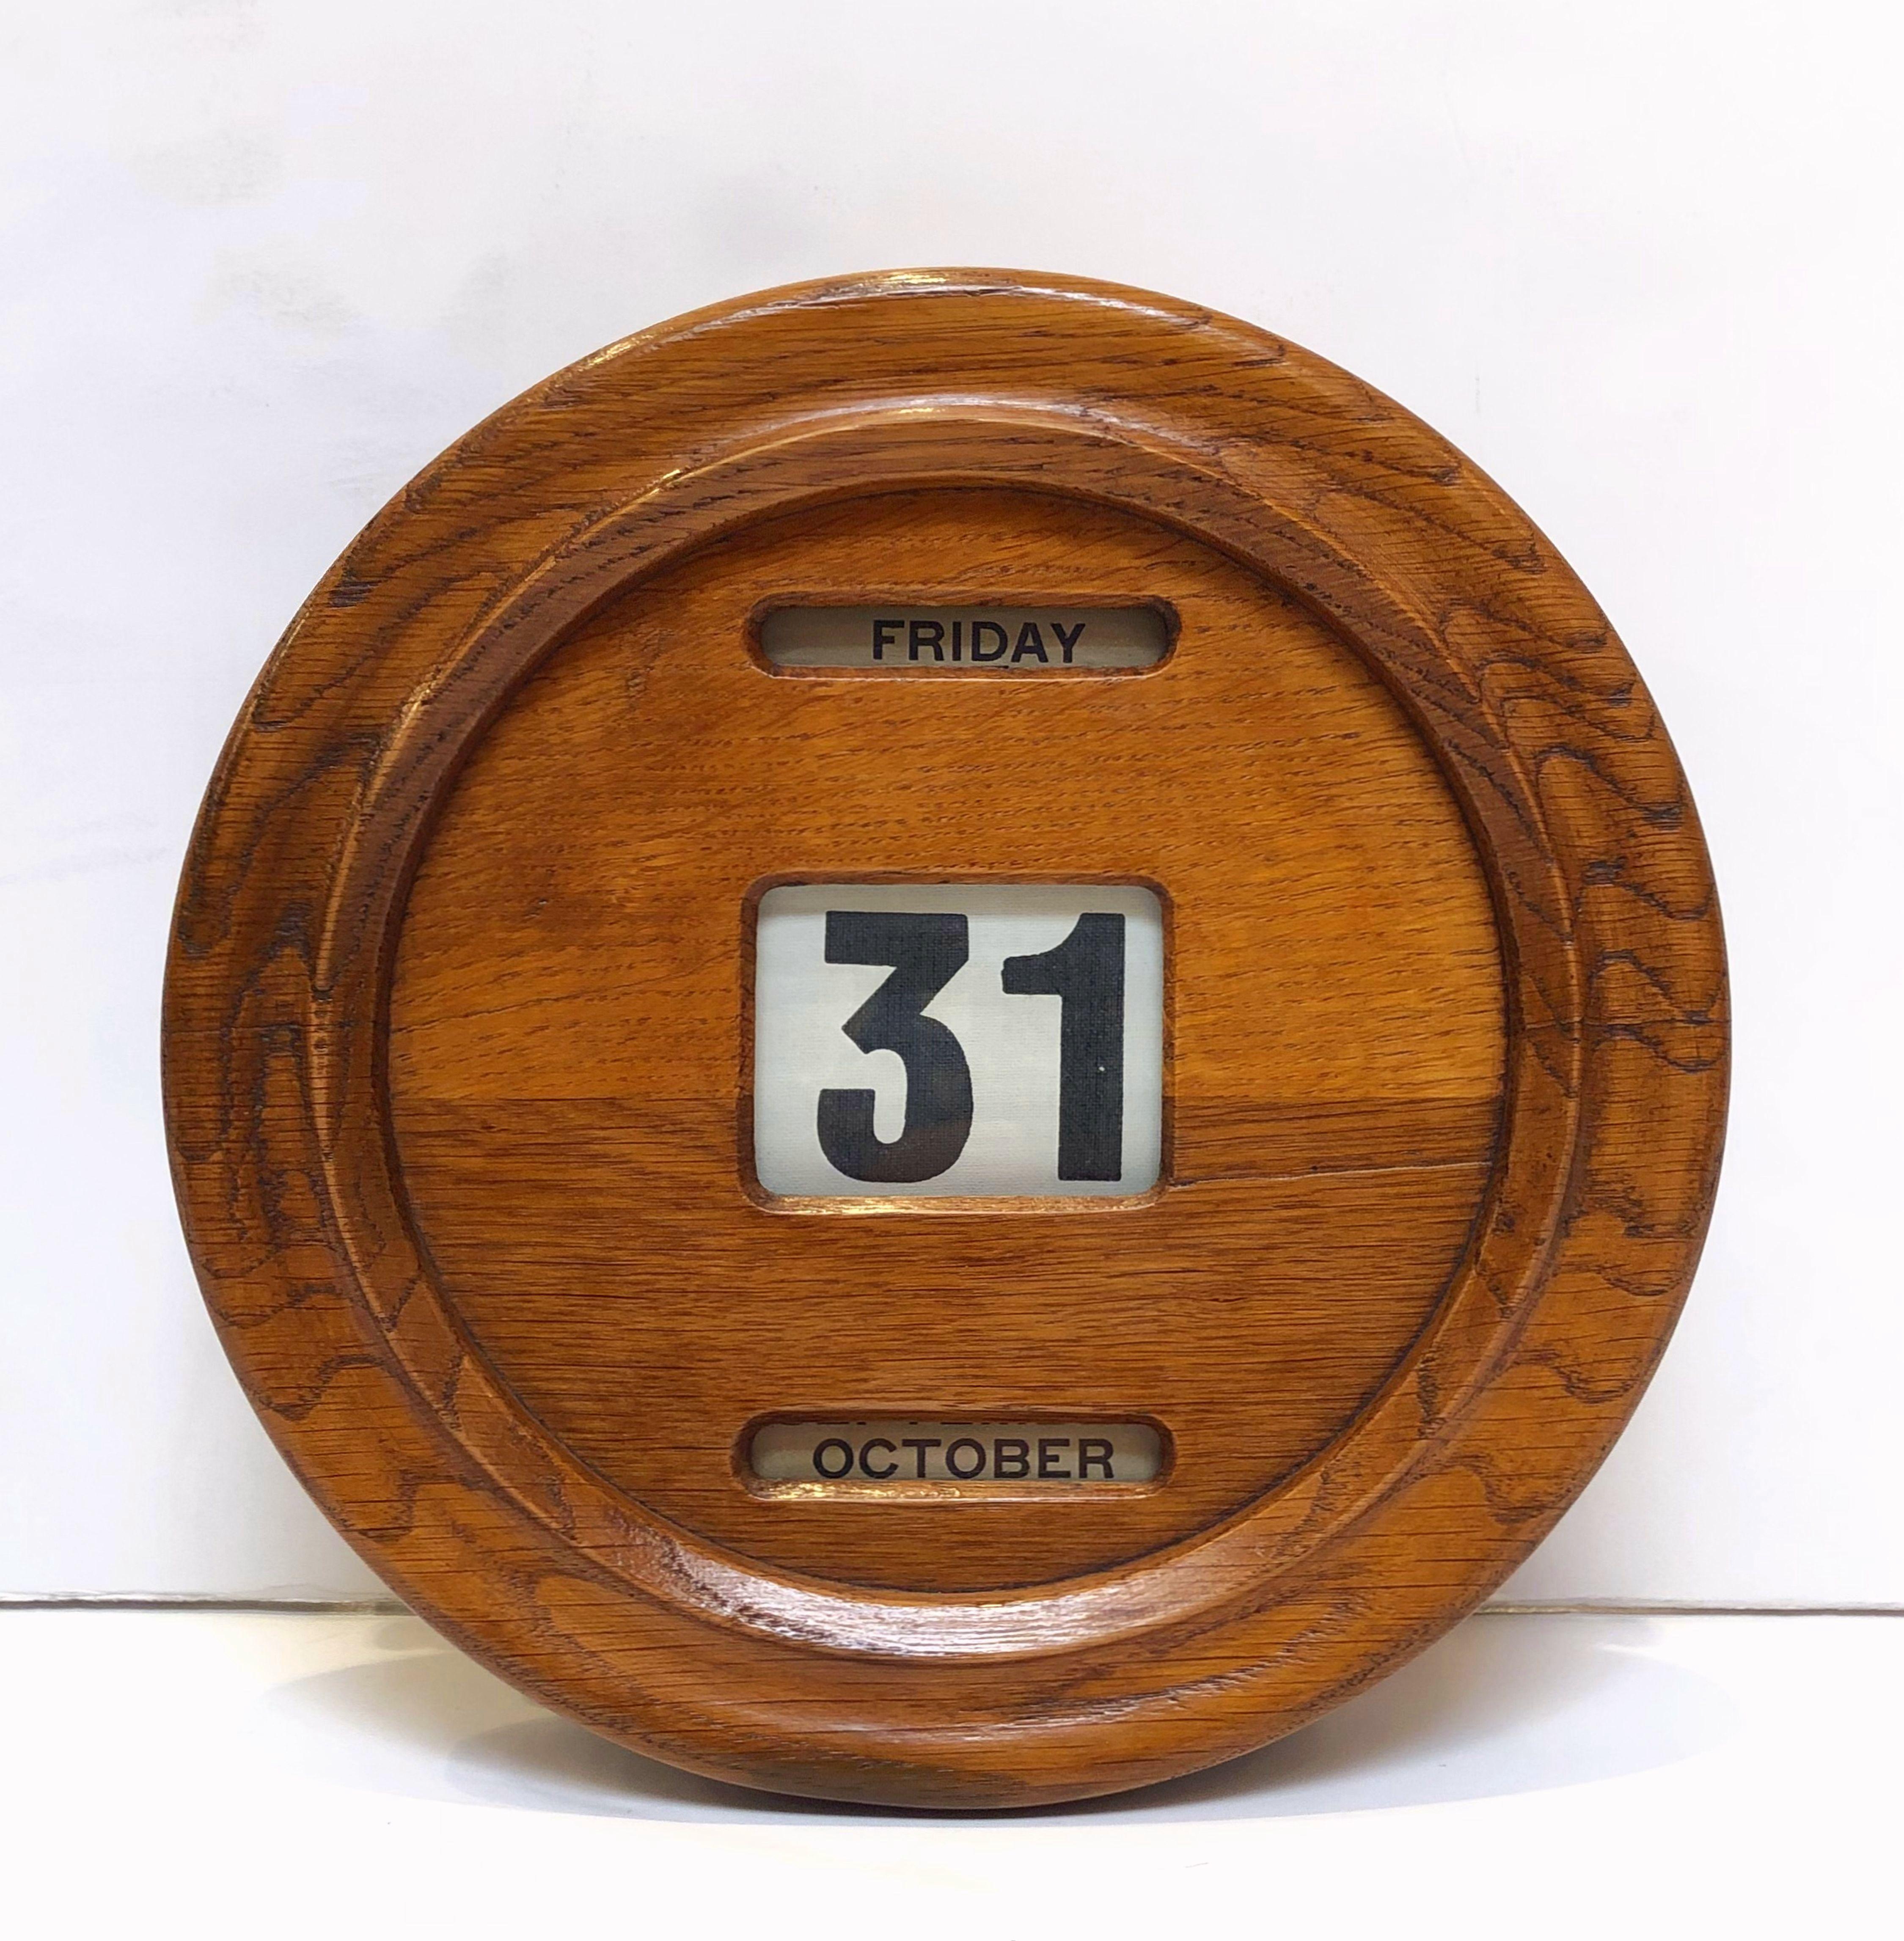 A fine large English perpetual calendar of patinated oak from the Edwardian era, featuring with a round face-plate (diameter 9 inches) mounted to a box back, with original fabric spools behind glazed panels, the four adjusters on each side present